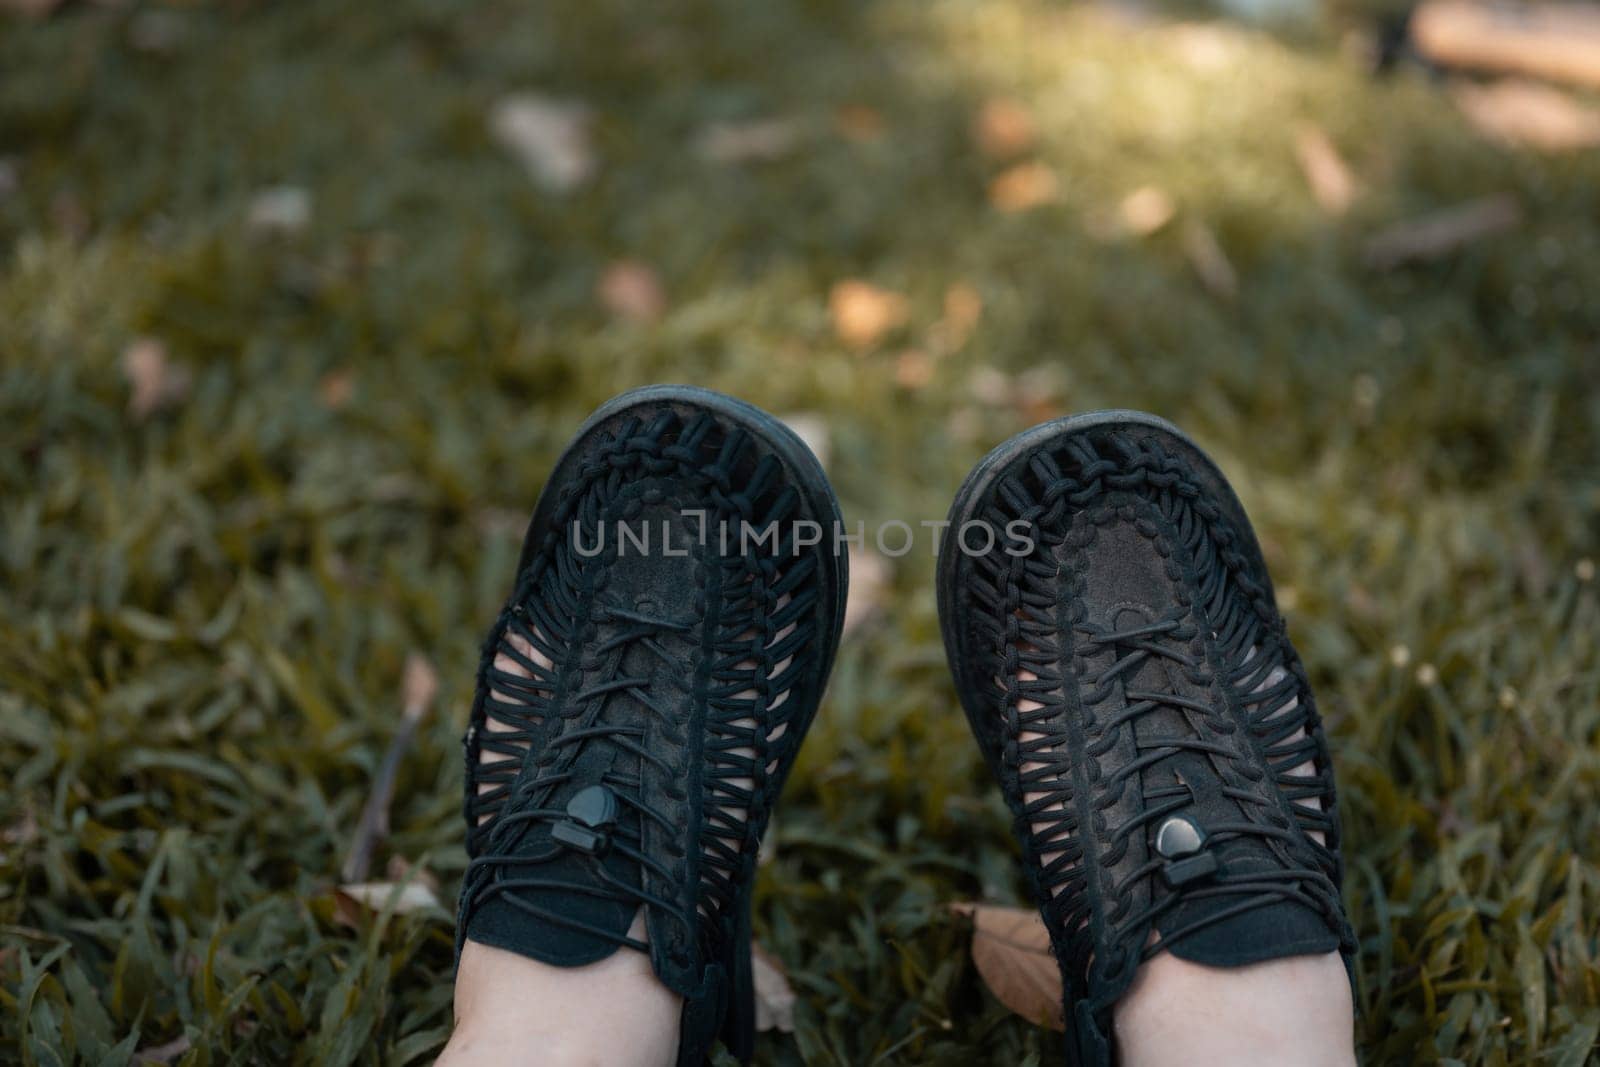 Close up male feet in sneakers on green lawn dappled with sunlight.